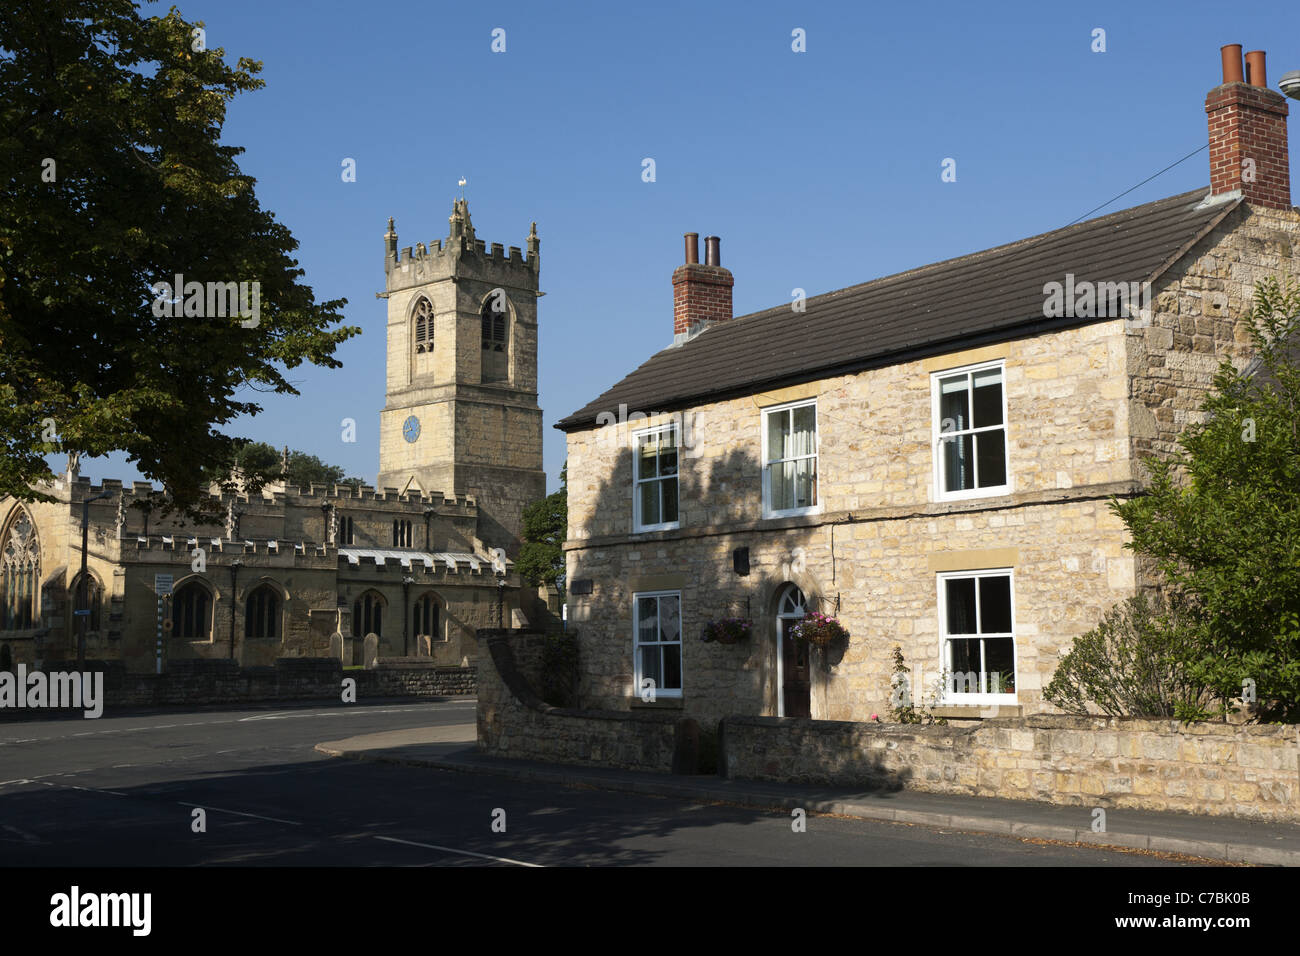 400 year old limestone farmhouse with St Peter's Church in the background, Barnburgh, Yorkshire, England. Stock Photo